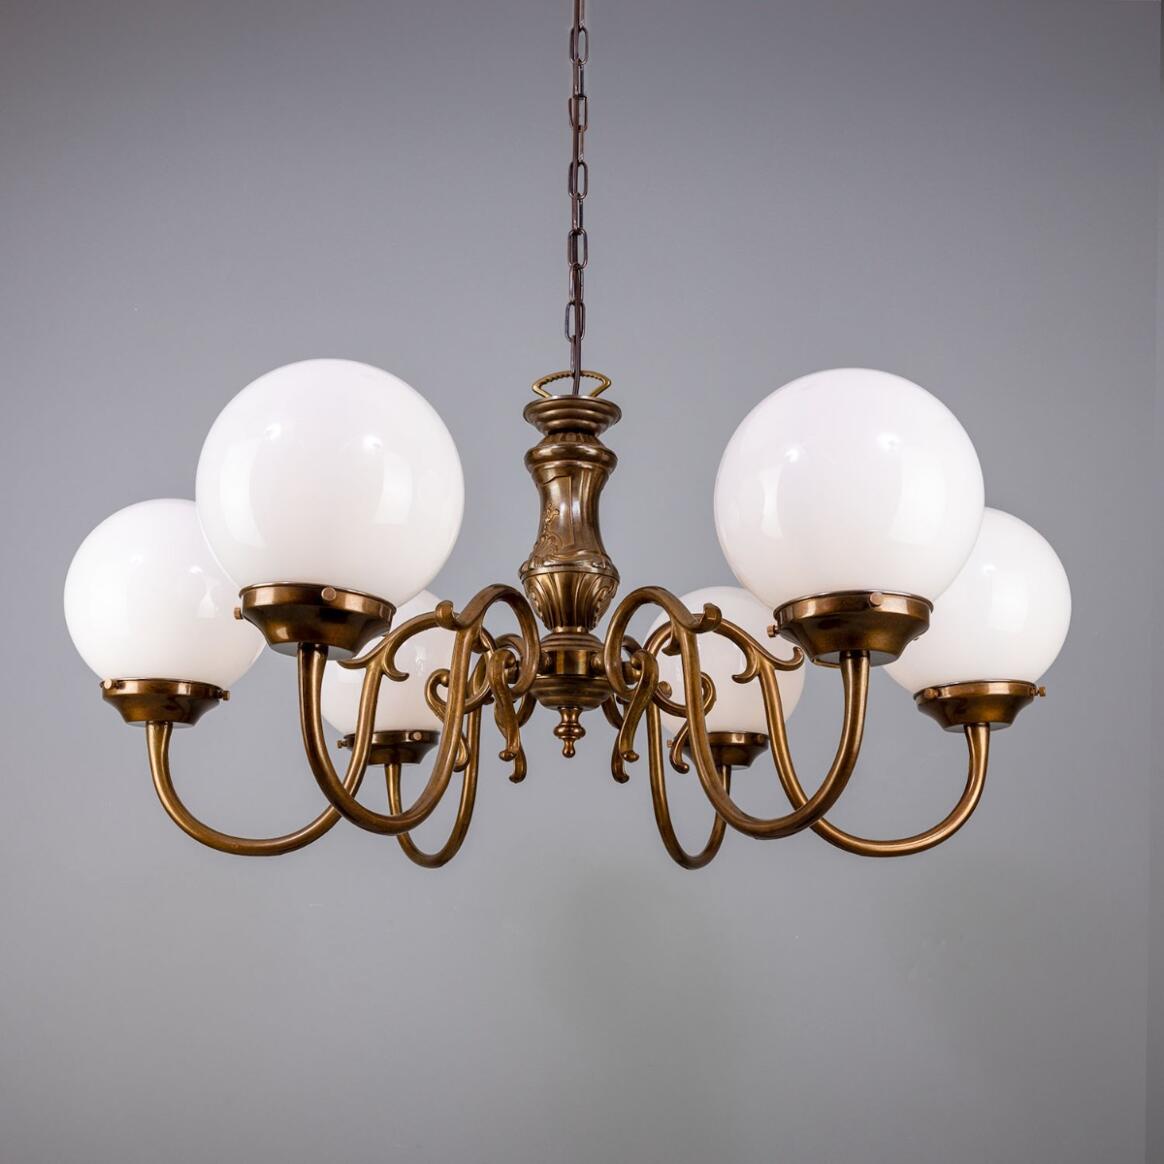 Carnew Traditional Chandelier with Opal Glass Globes, Six-Arm main product image